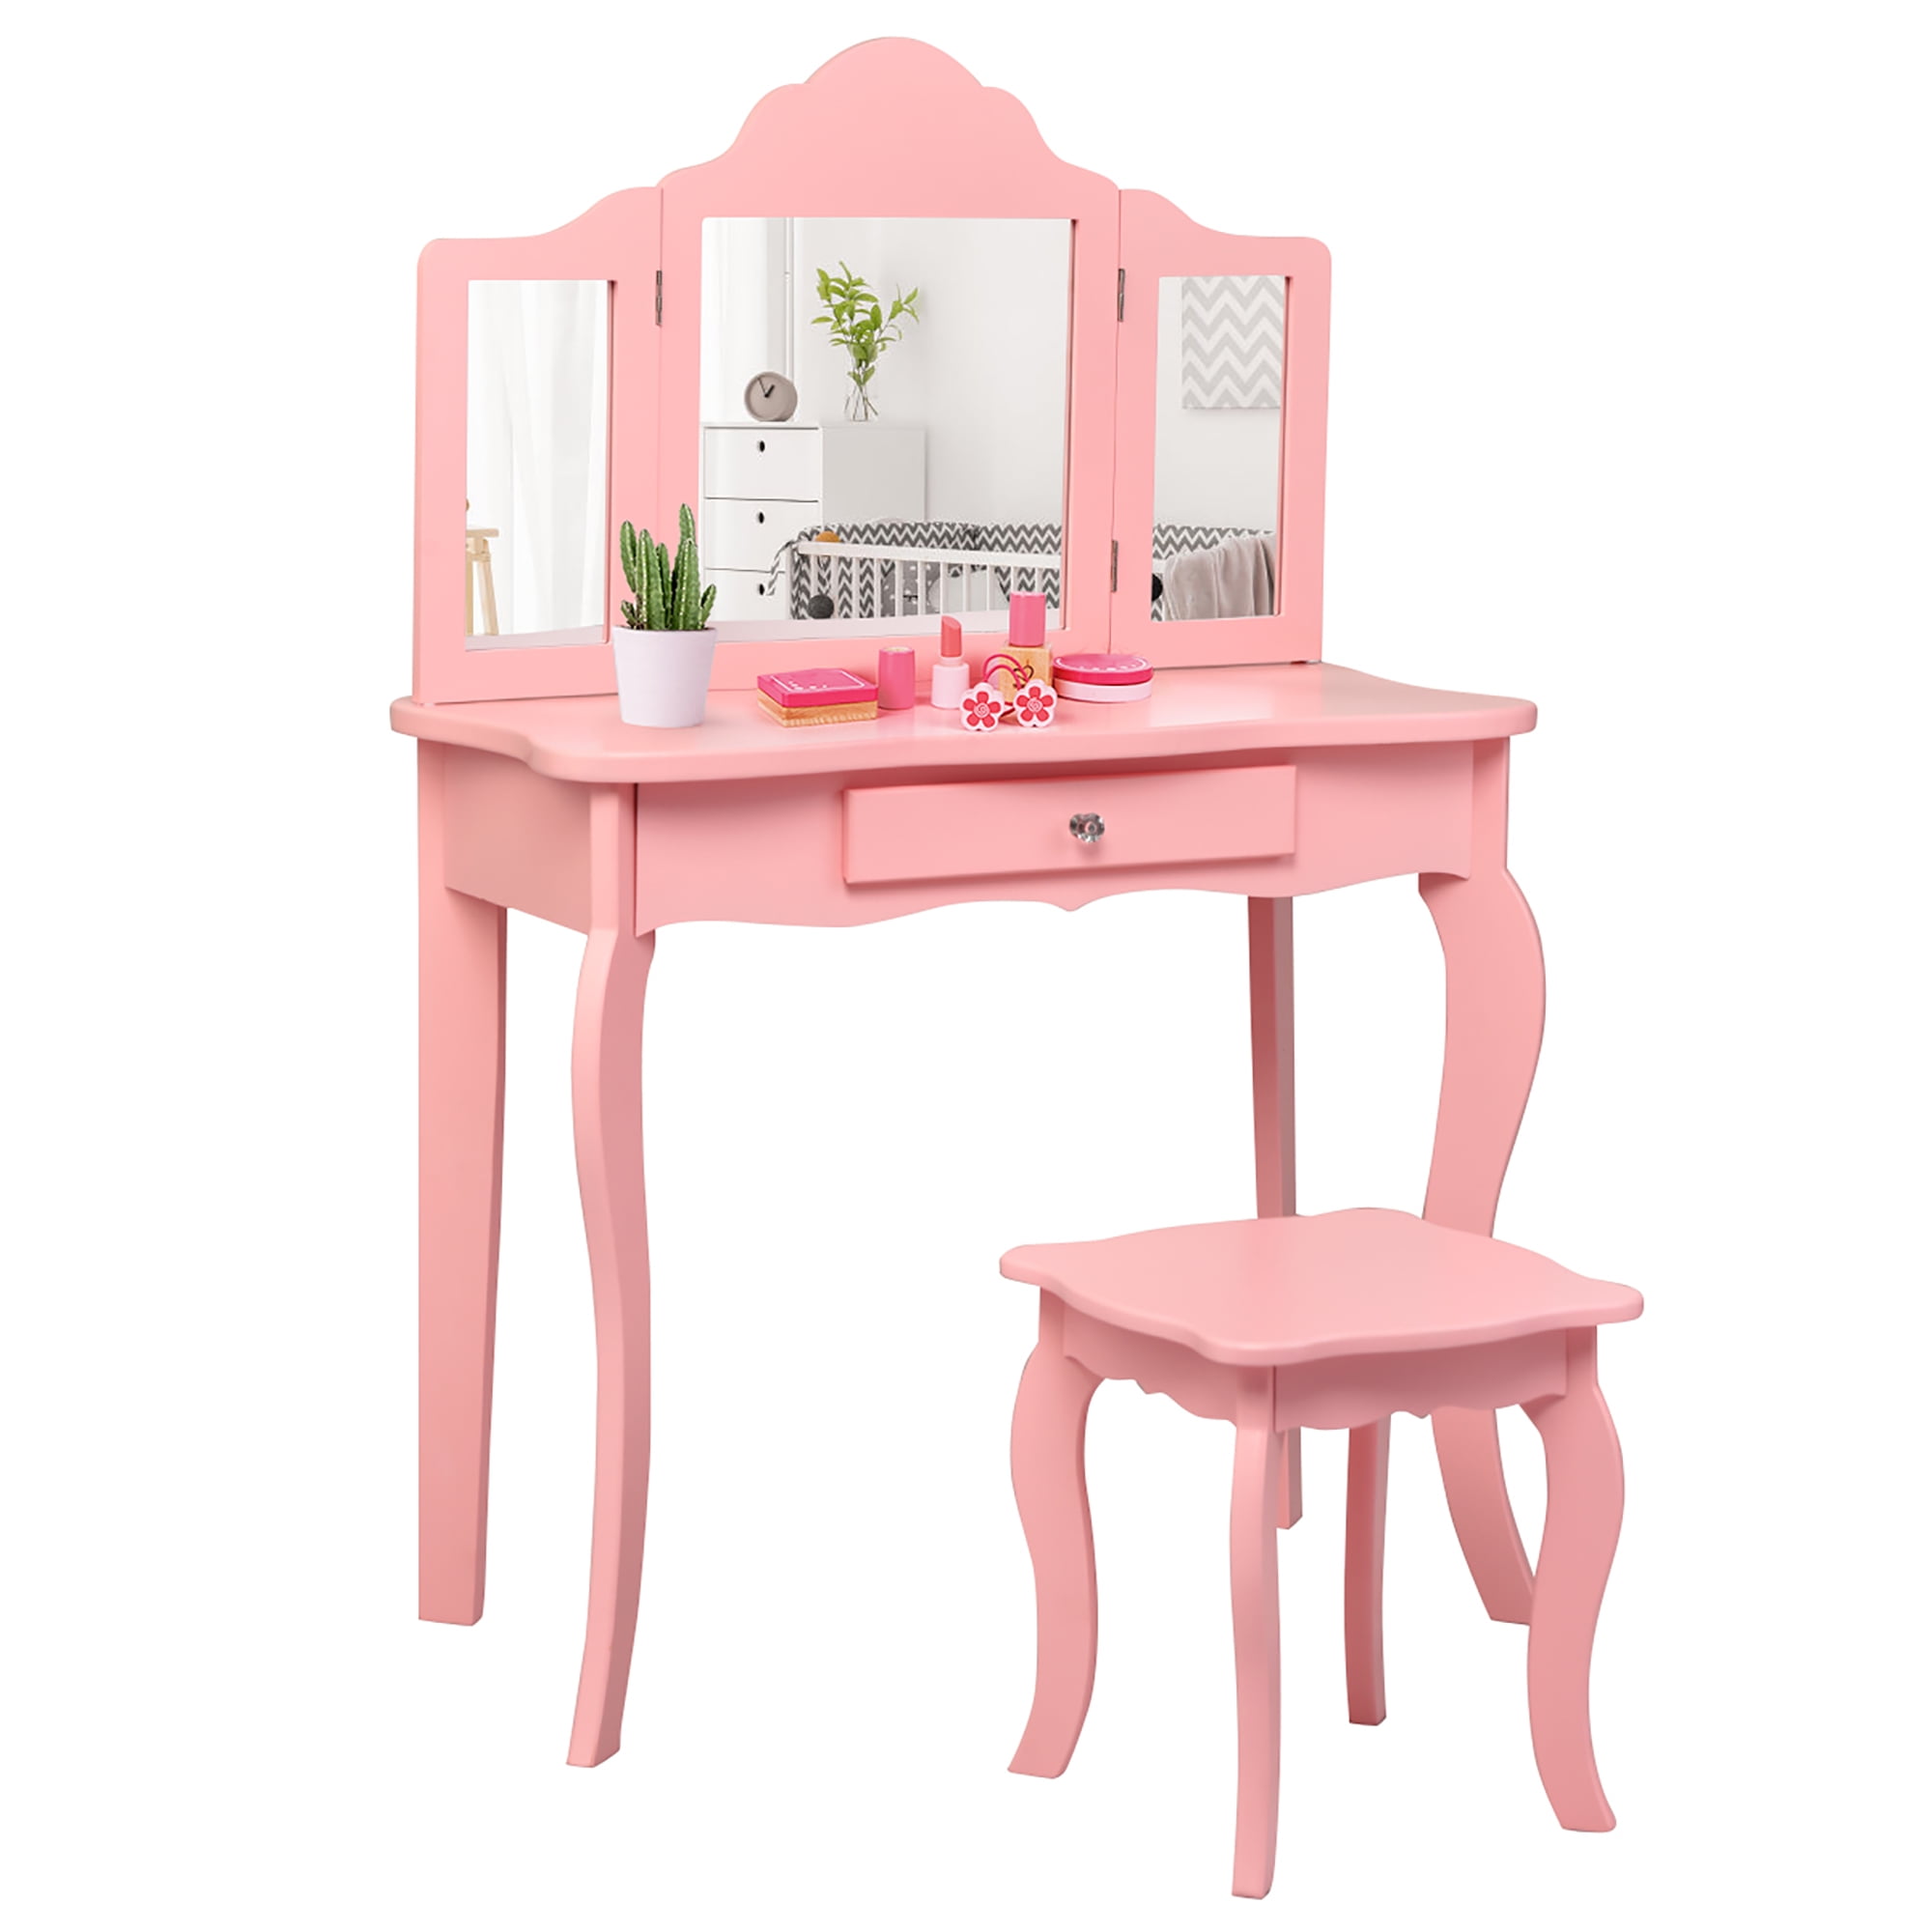 Details about  / Children/'s Table Chair Set Kids Vanity Makeup Dressing Furniture w//Mirror/&Drawer